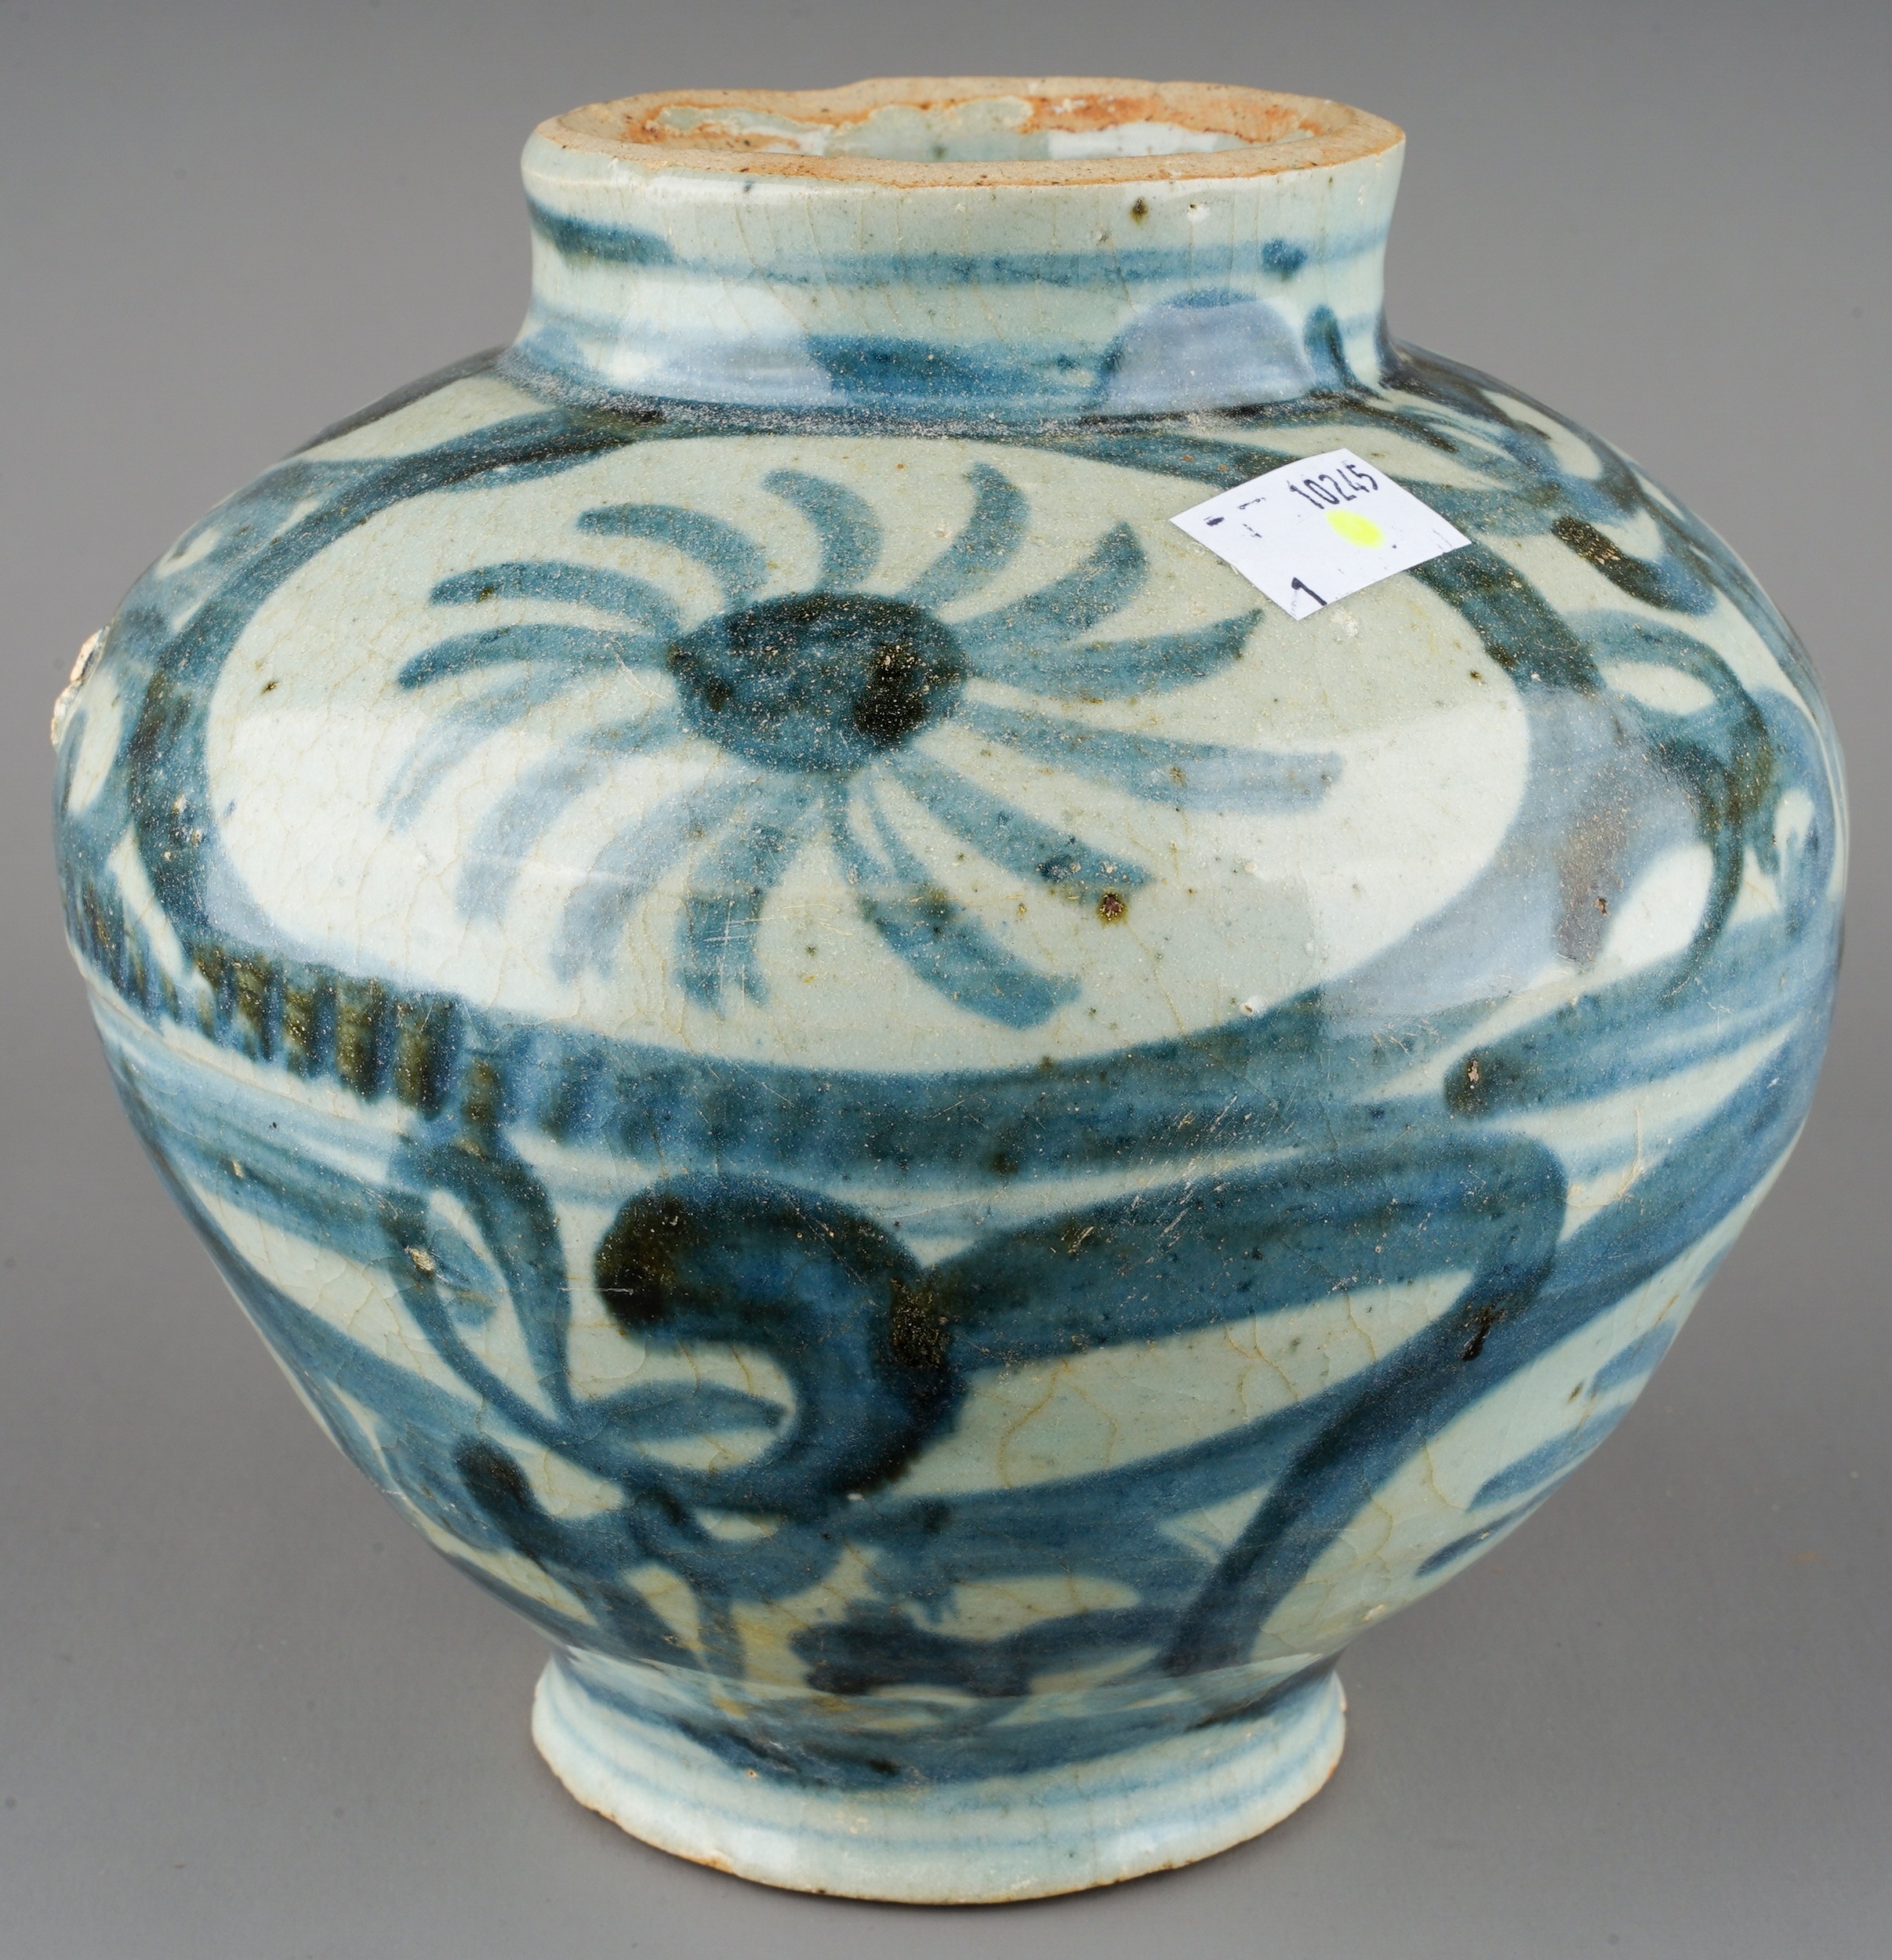 A Chinese Swatow or Zhangzhou Export Ware ginger or gunpowder jar, probably late 16th Century, the - Image 3 of 3